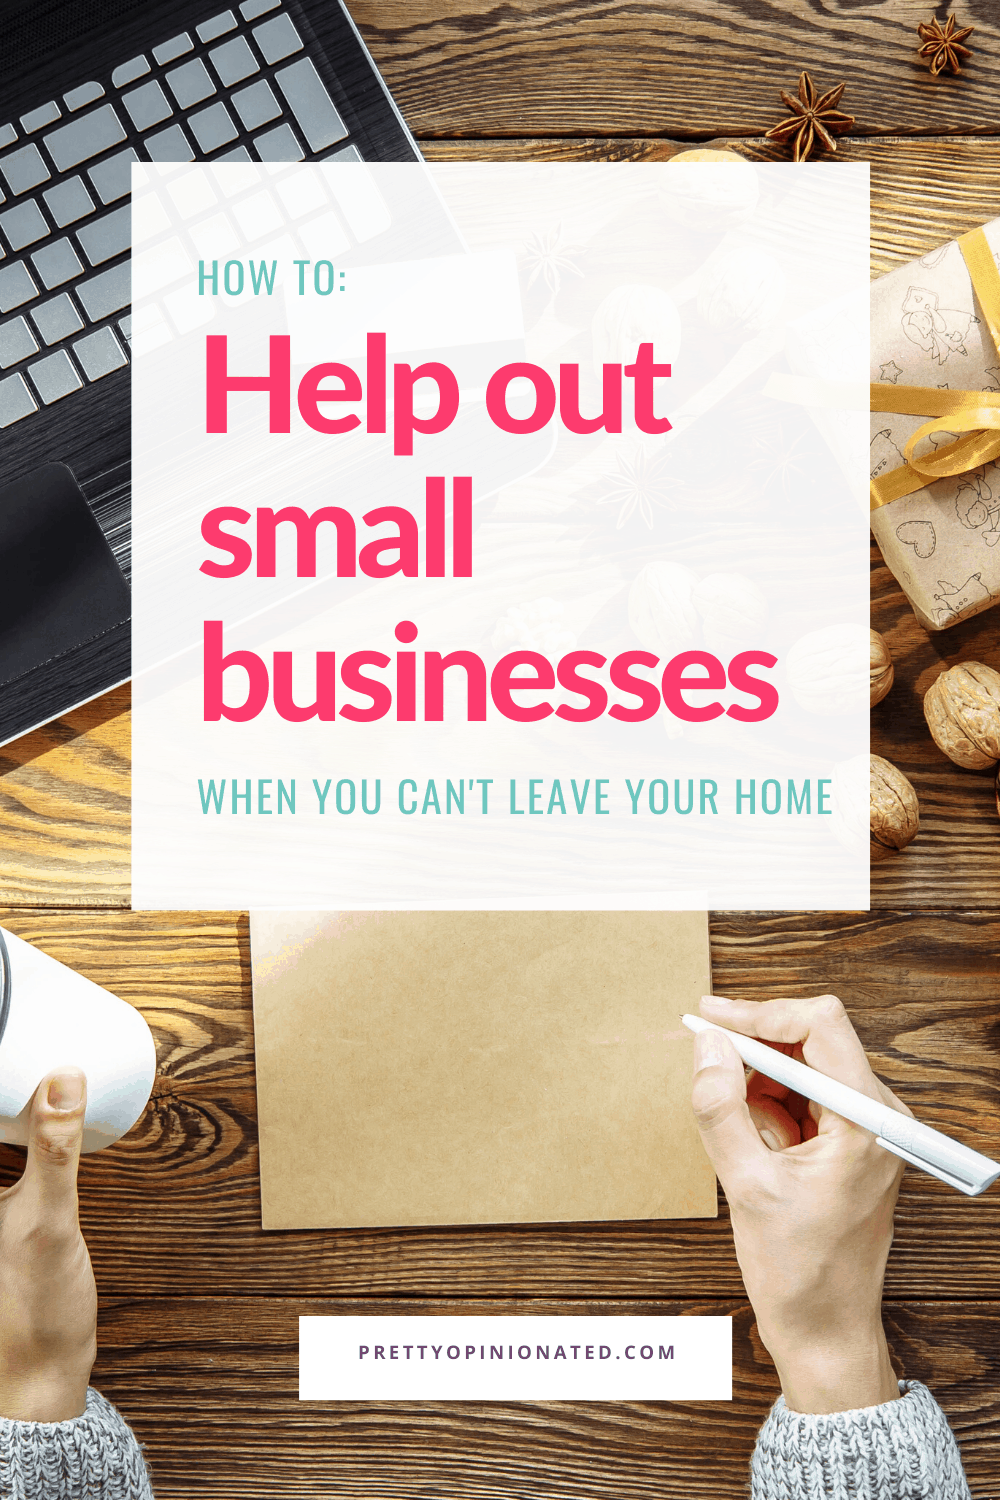 Small businesses are taking a huge hit right now, costing families their livelihood. If you want to help them survive, read on for 6 things you can do right from your own home.